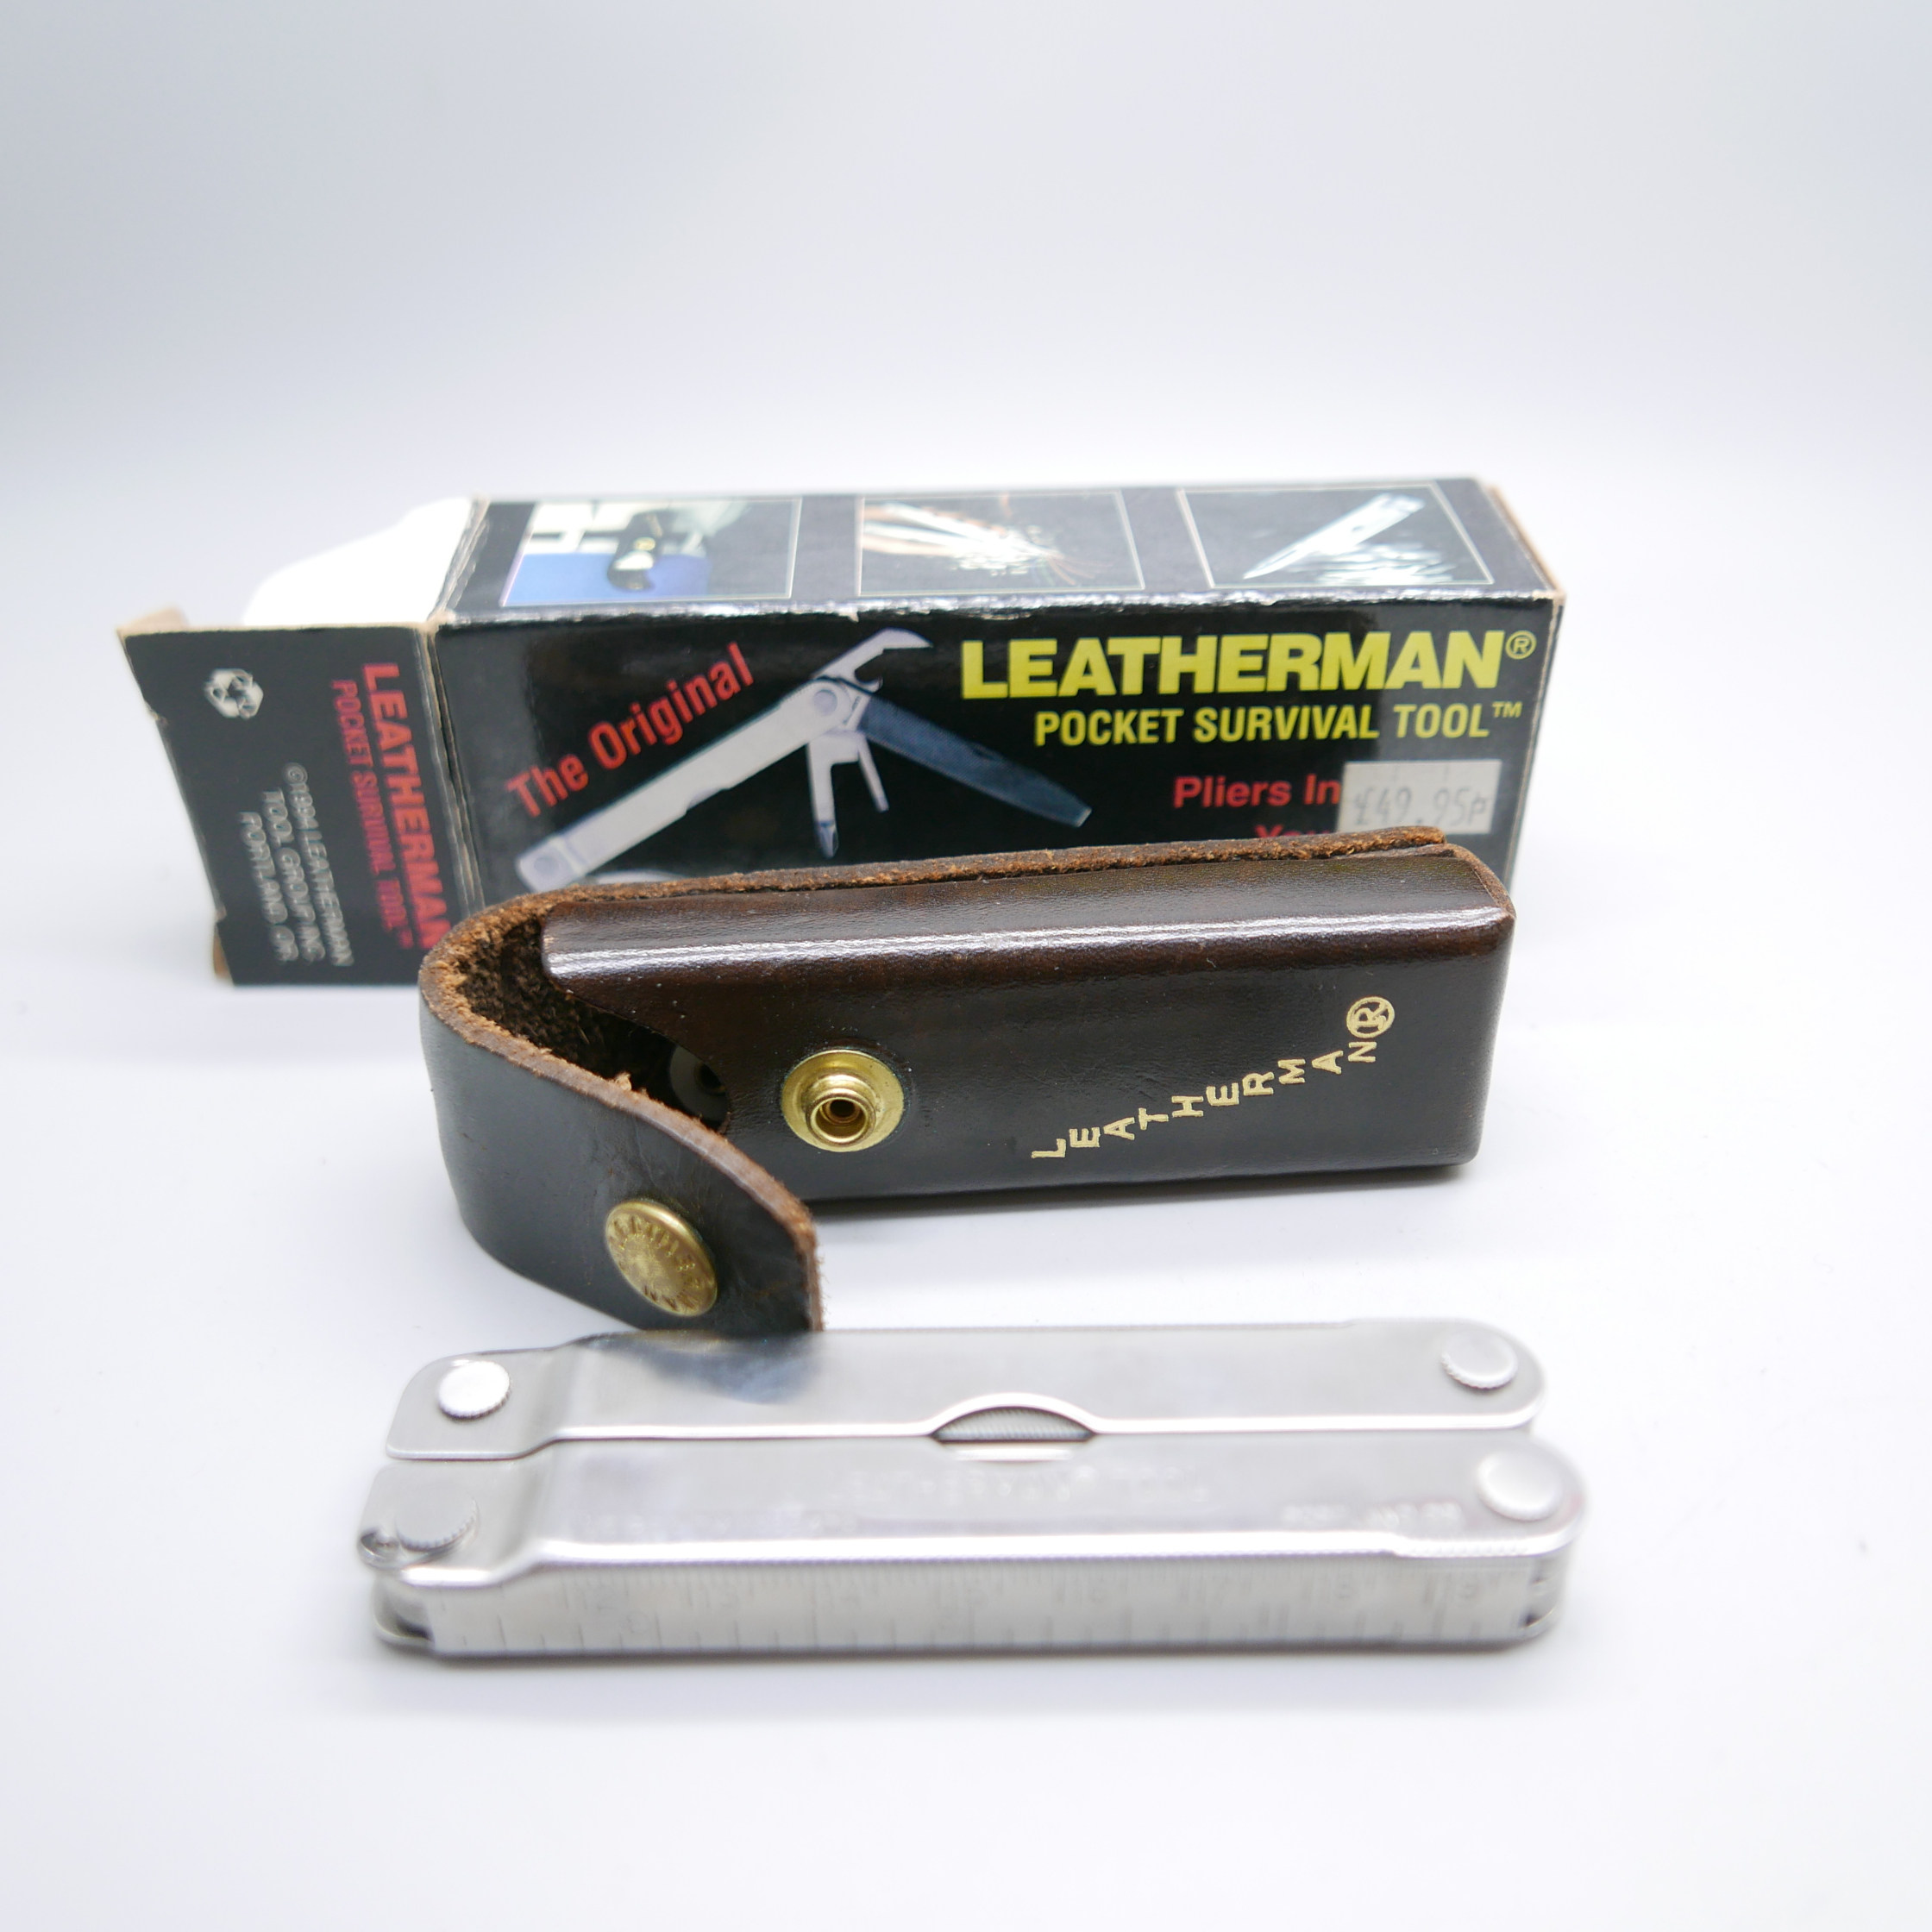 A Leatherman pocket survival tool, The Original, with leather case and outer box - Image 2 of 2